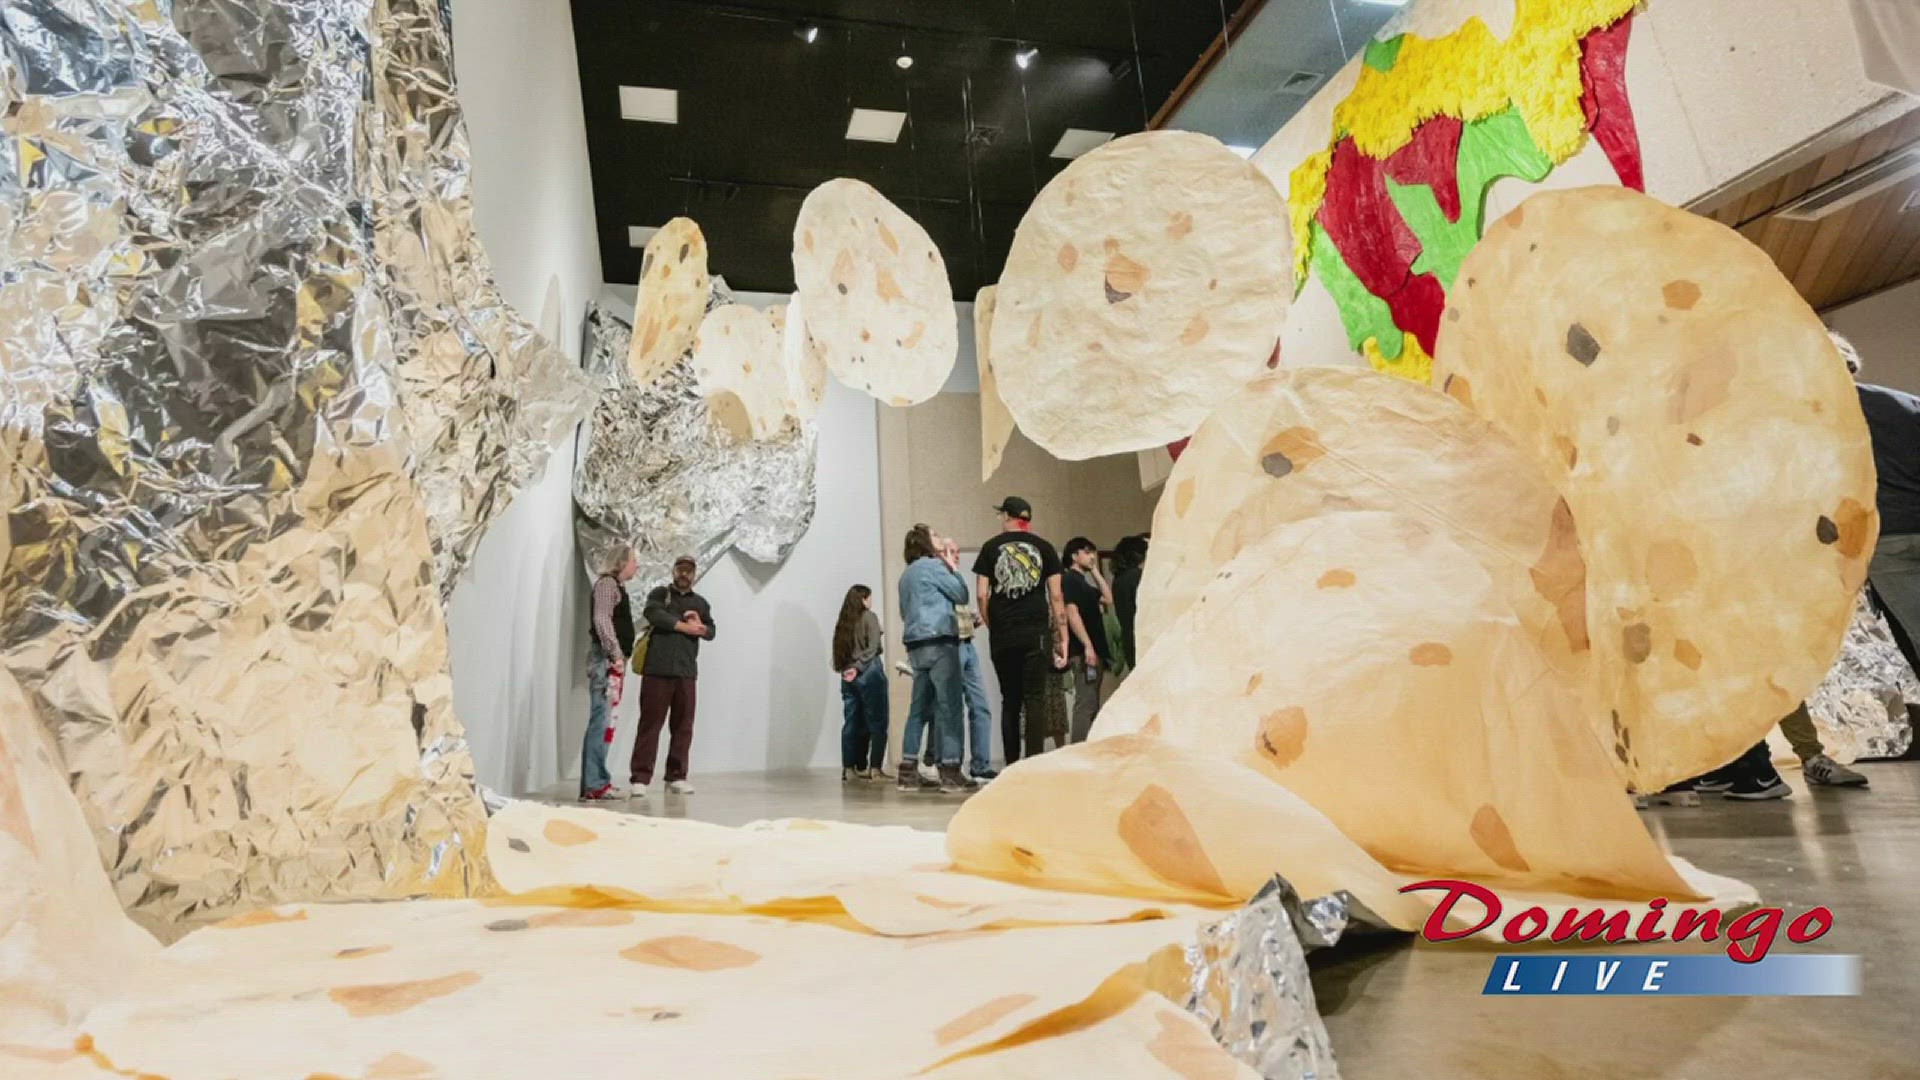 TAMU-CC's Weil Gallery will display the "Body of Us" giant tortilla art installation every day this week until Friday, Mar. 25.